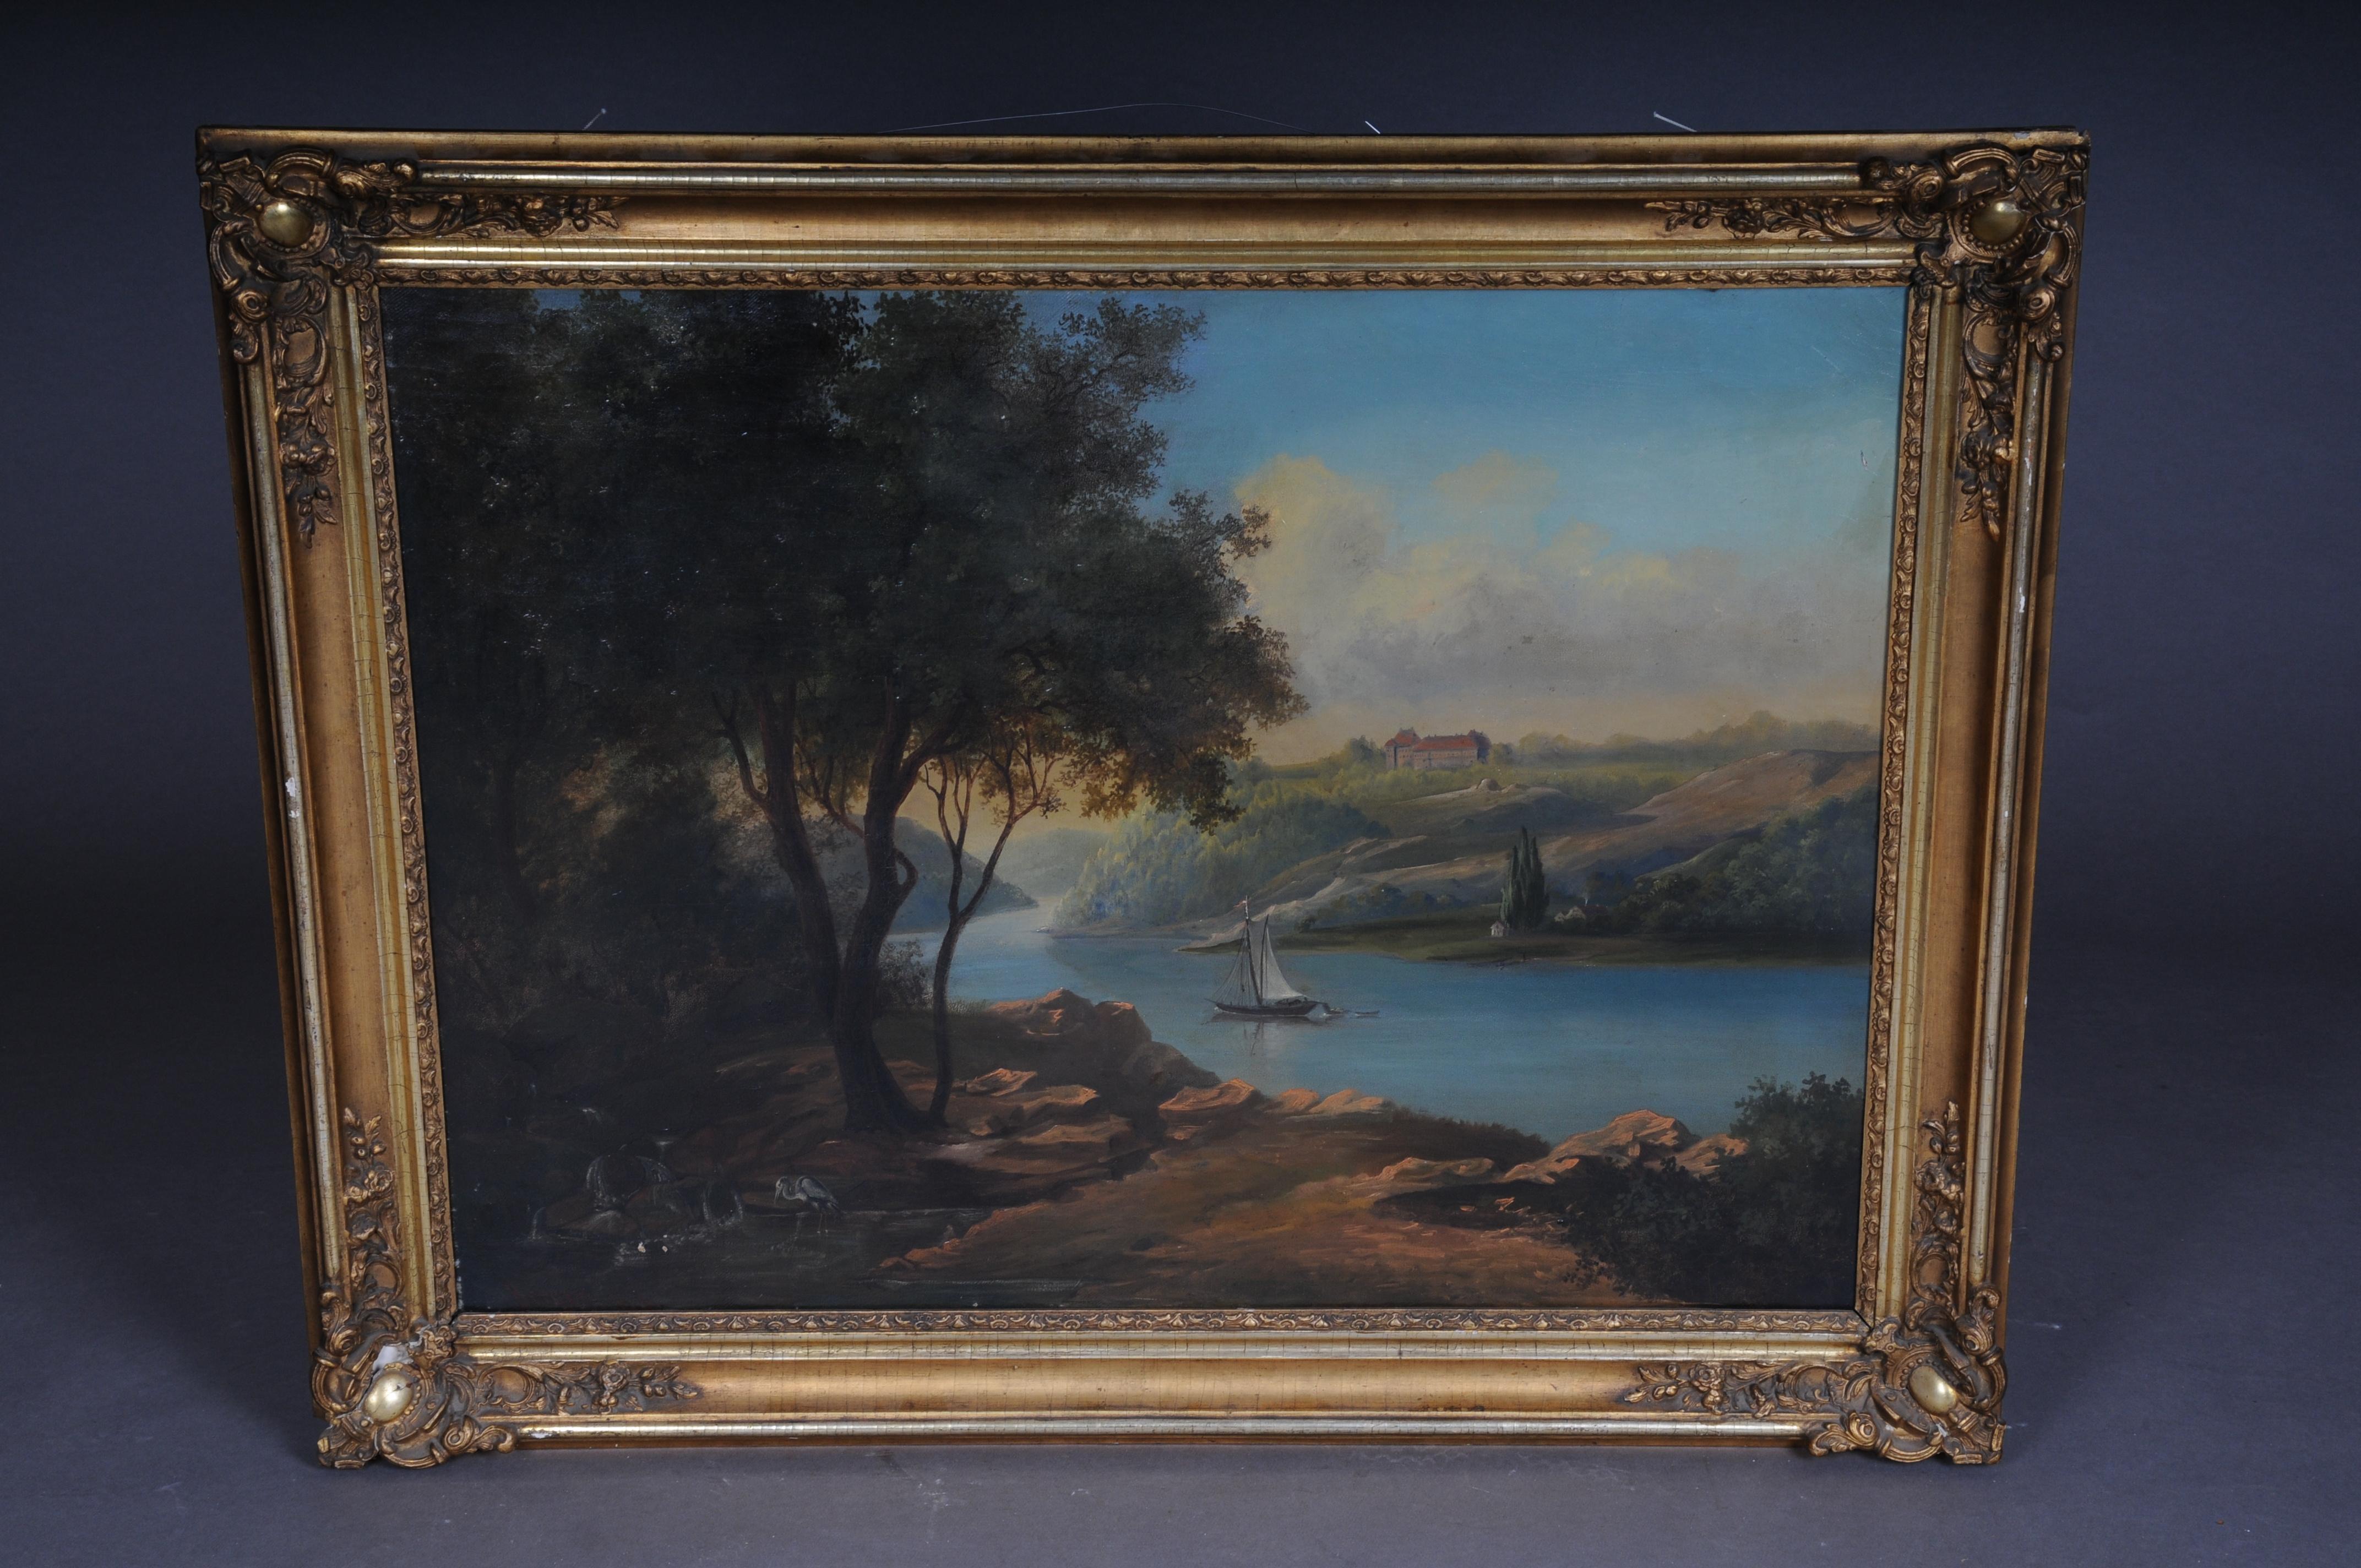 Oil painting idyllic river landscape/romantic scene 19th century

Finely painted oil on canvas depicting a river landscape with a sailing boat under a bright blue sky. A castle can be seen in the far distance. The painting has an incredible depth